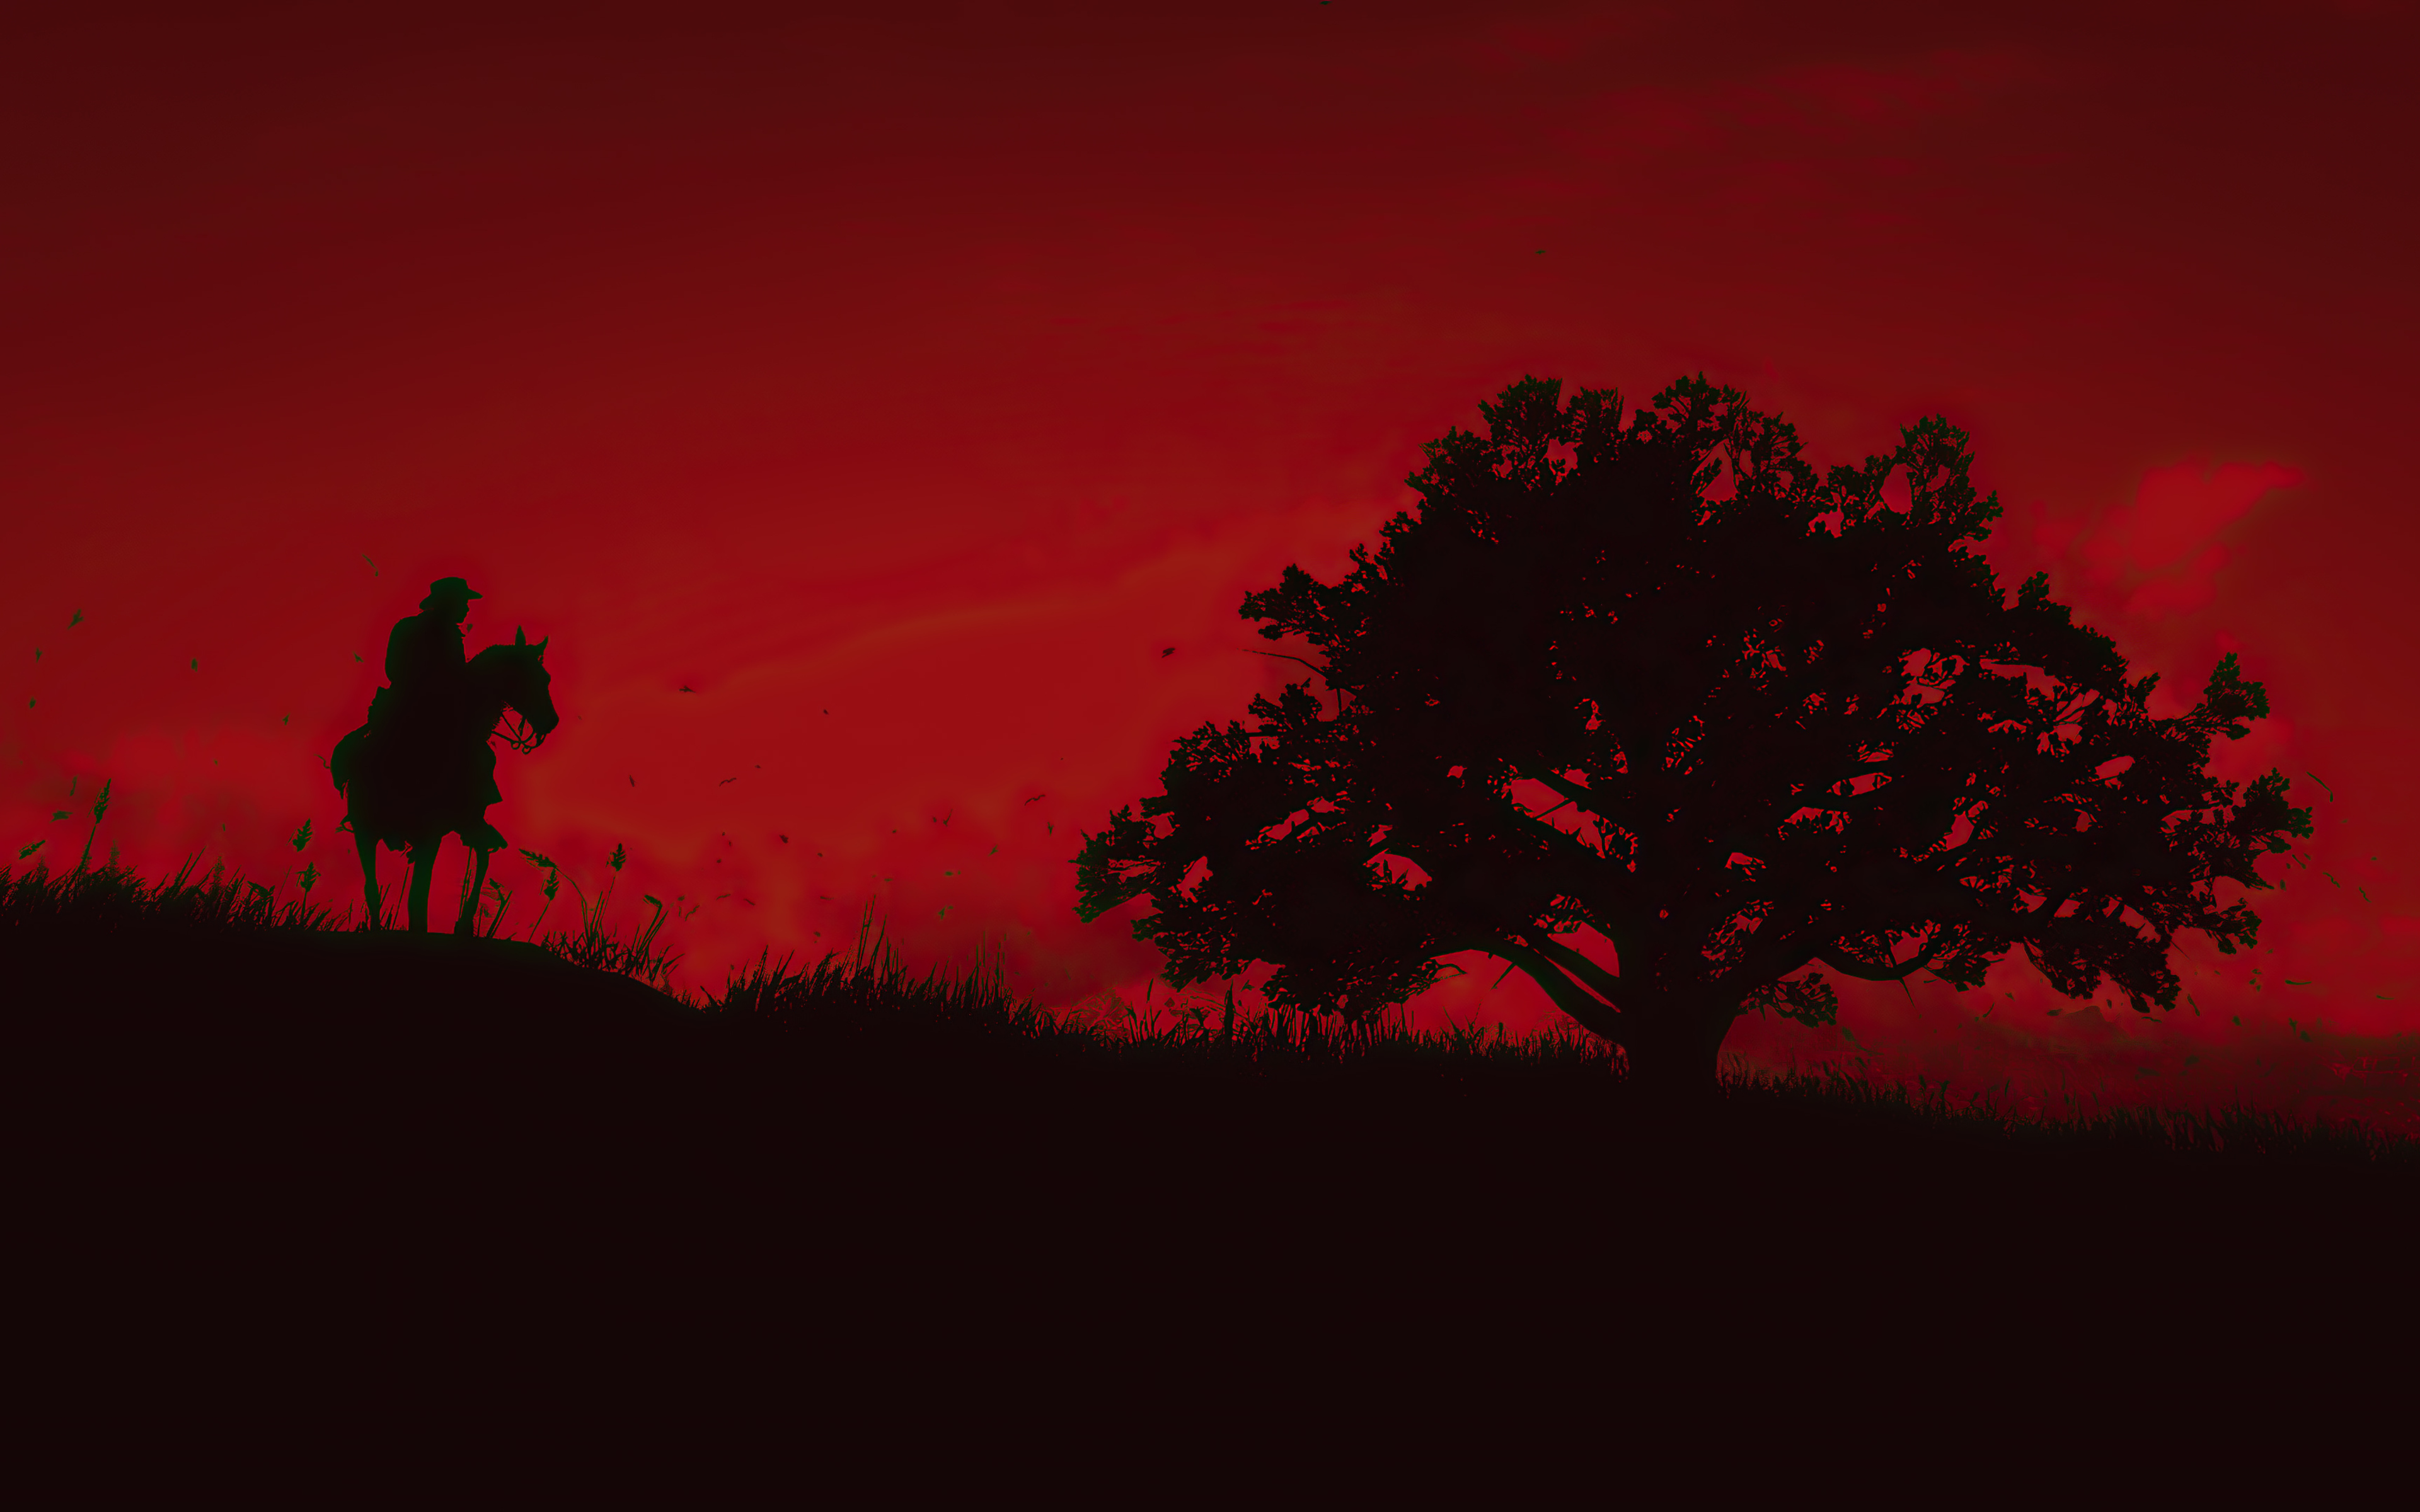 red-dead-redemption-ii-rs.jpg